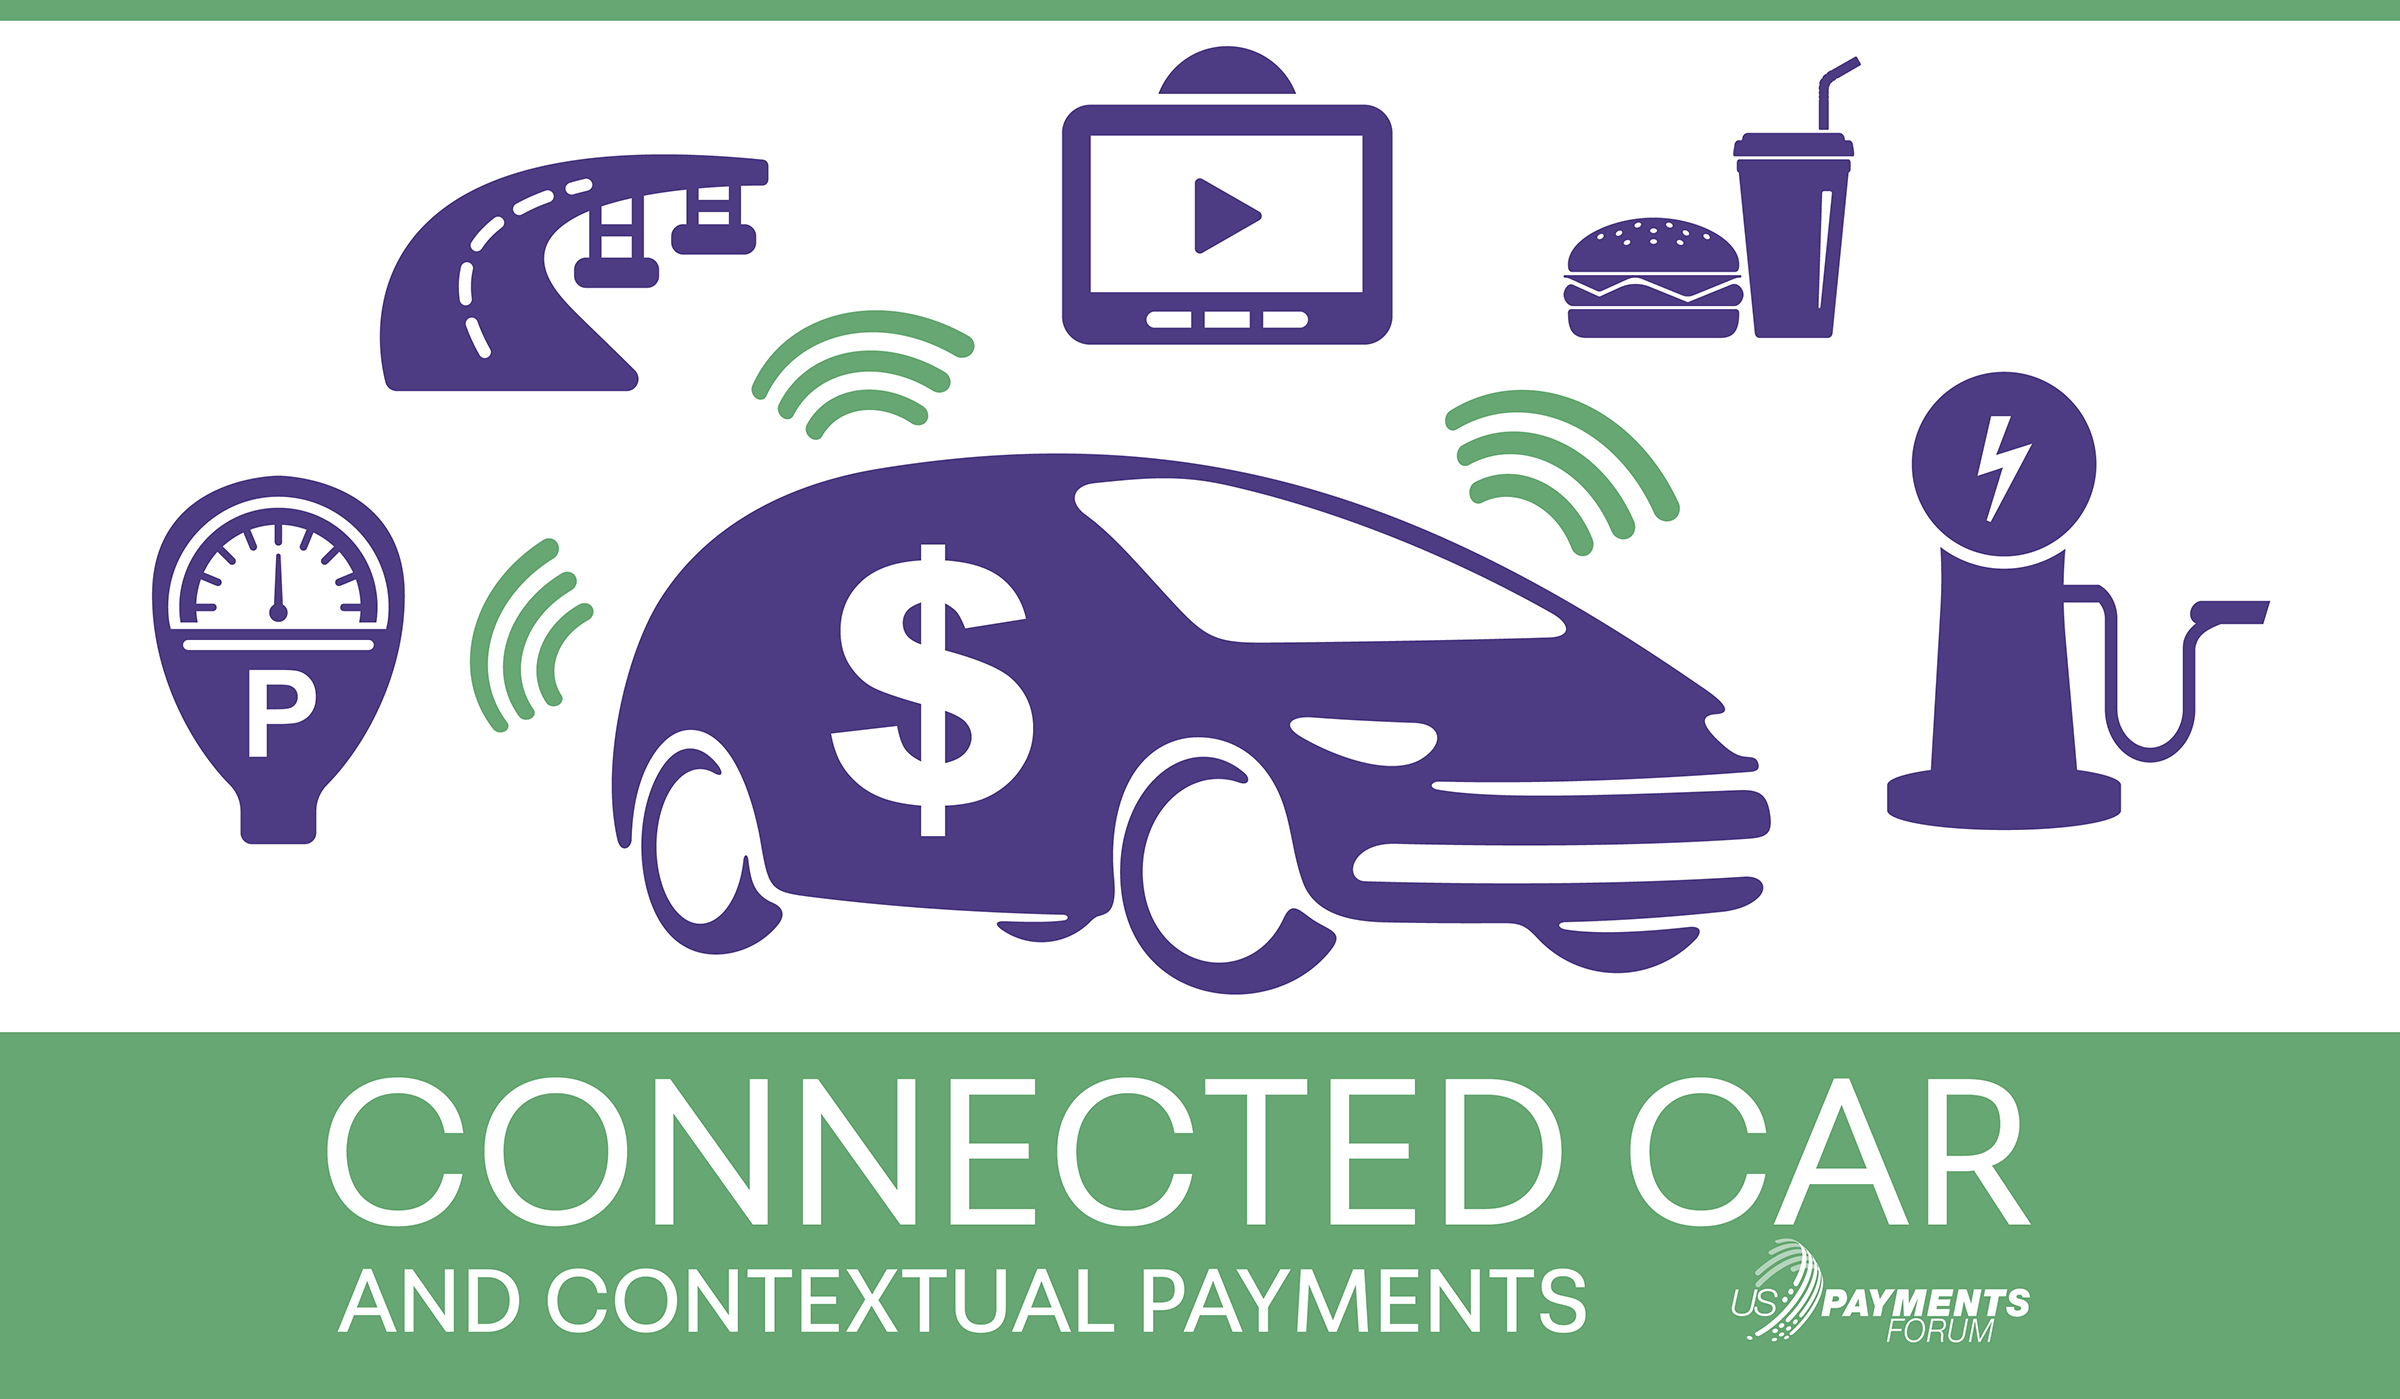 Connected Car and Contextual Payments